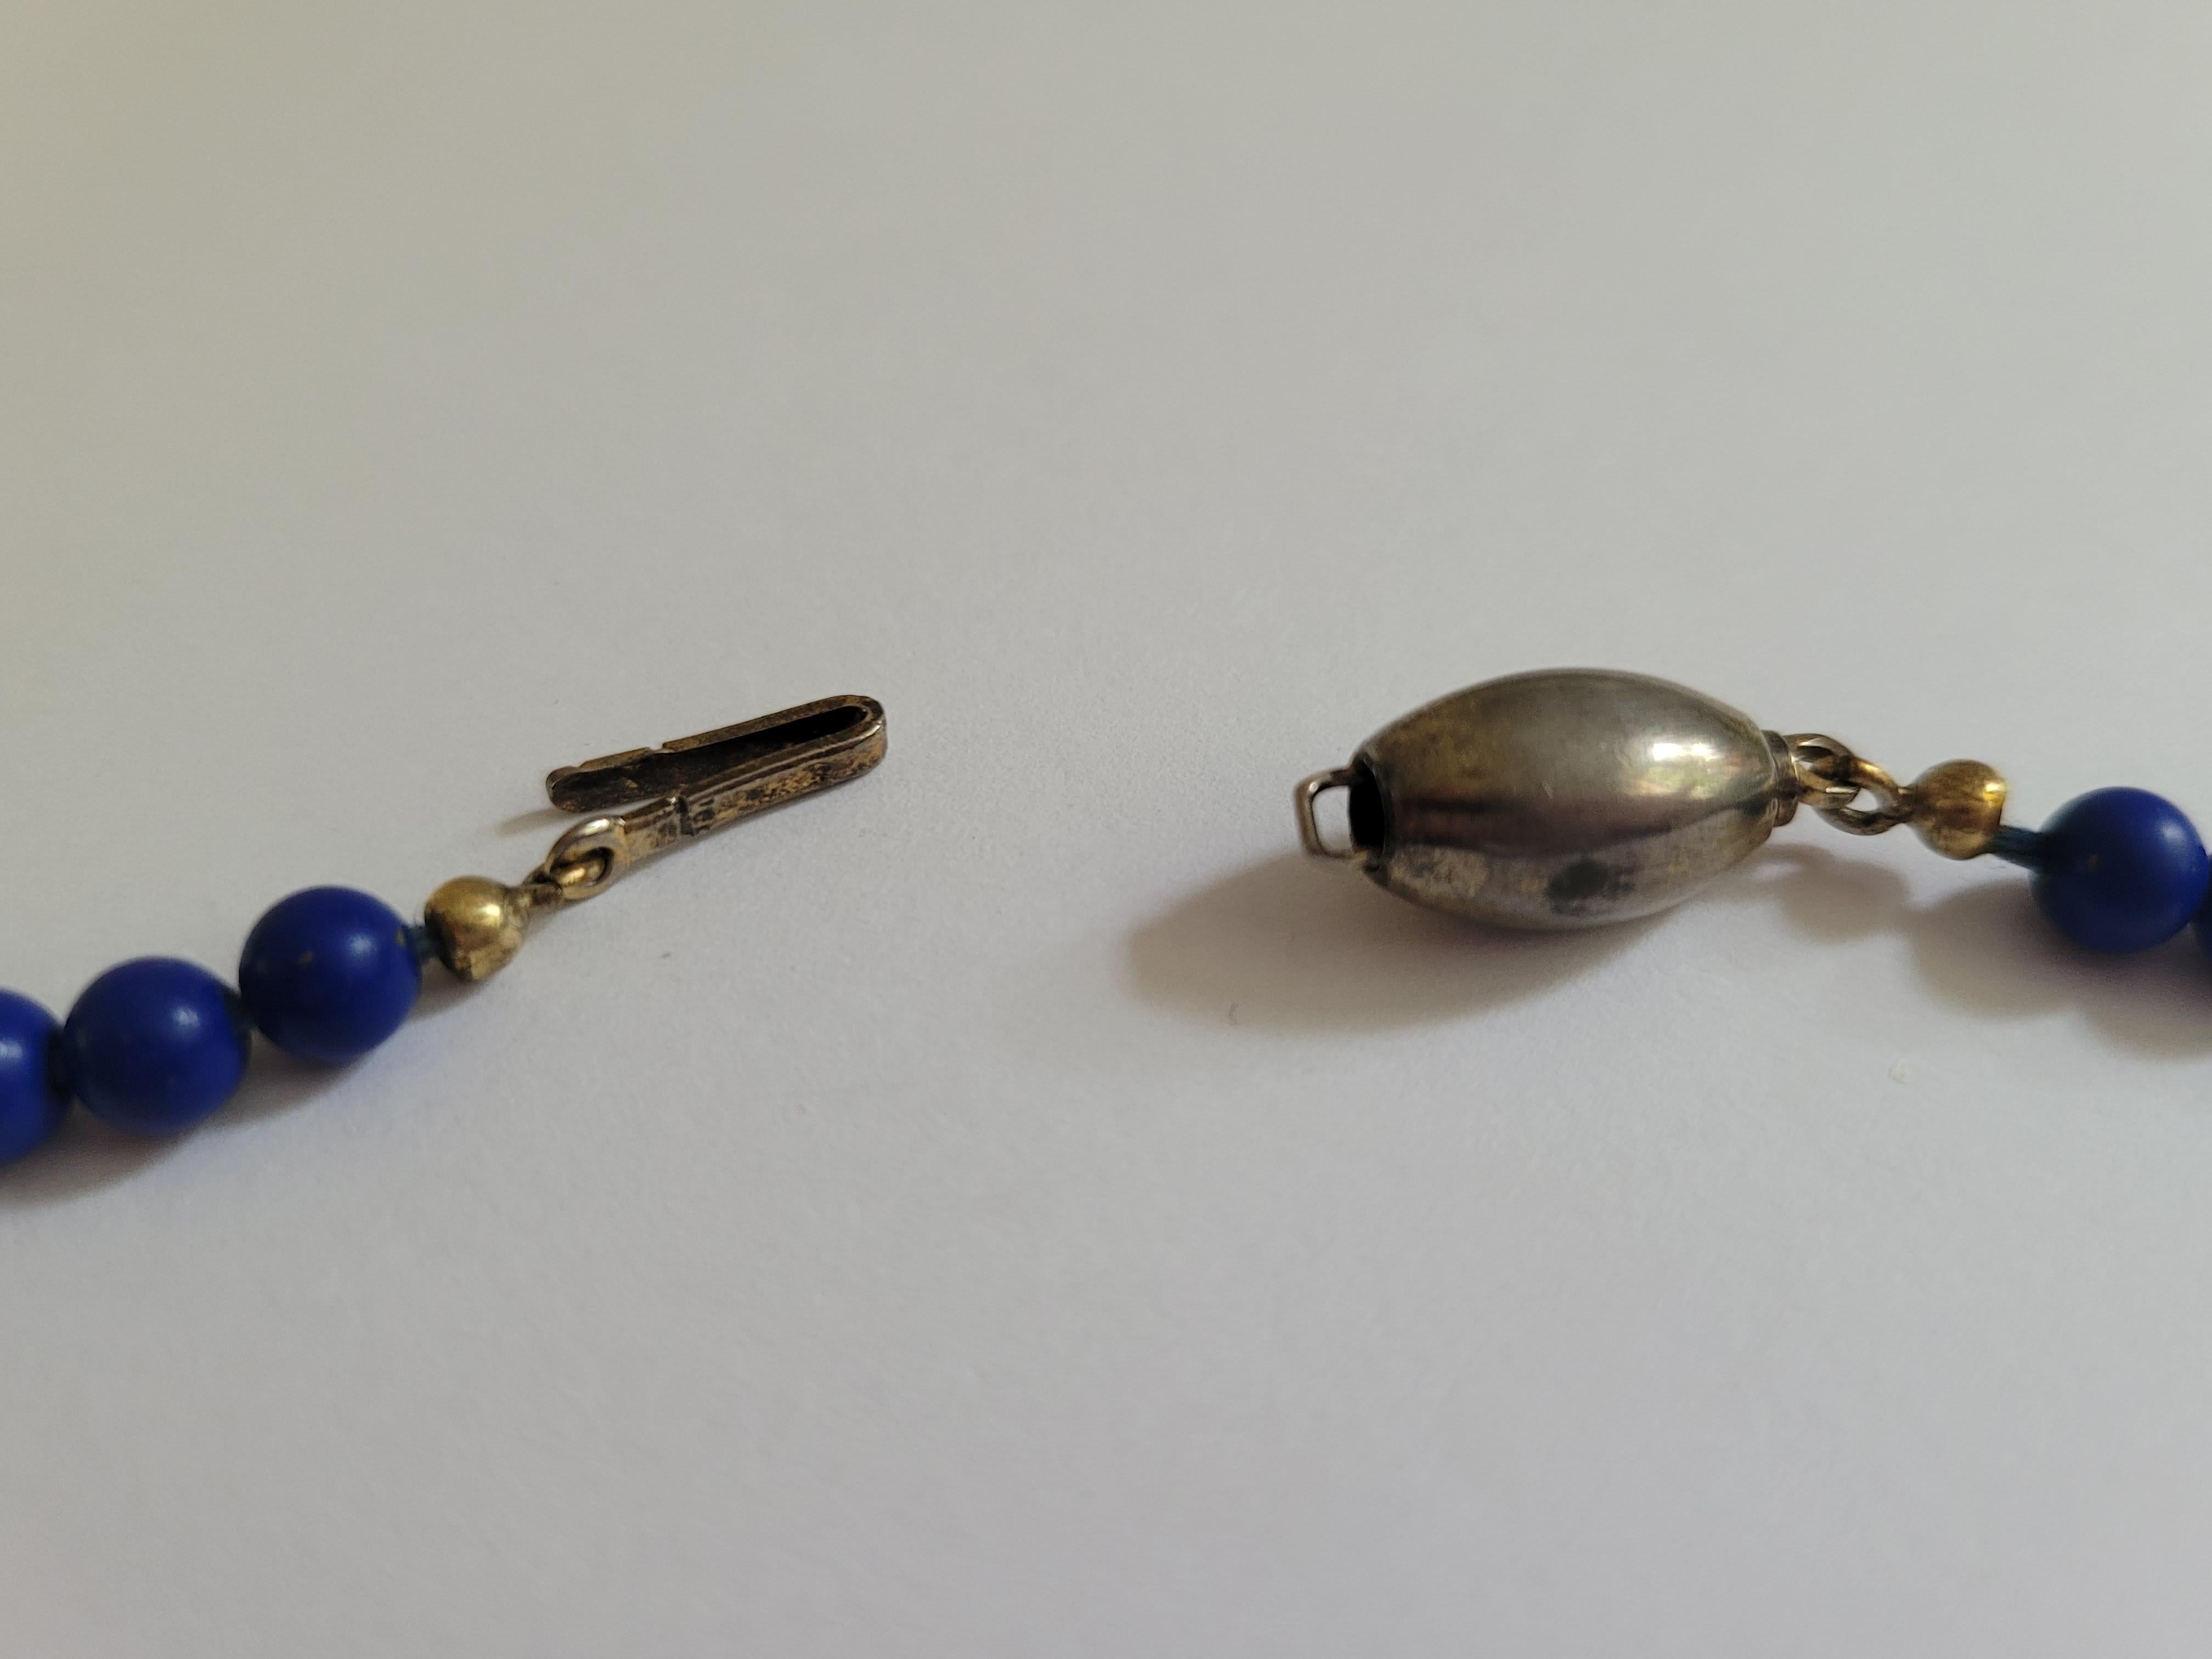 Vintage Heart Locket and Lapis Lazuli Beads necklace For Sale 3